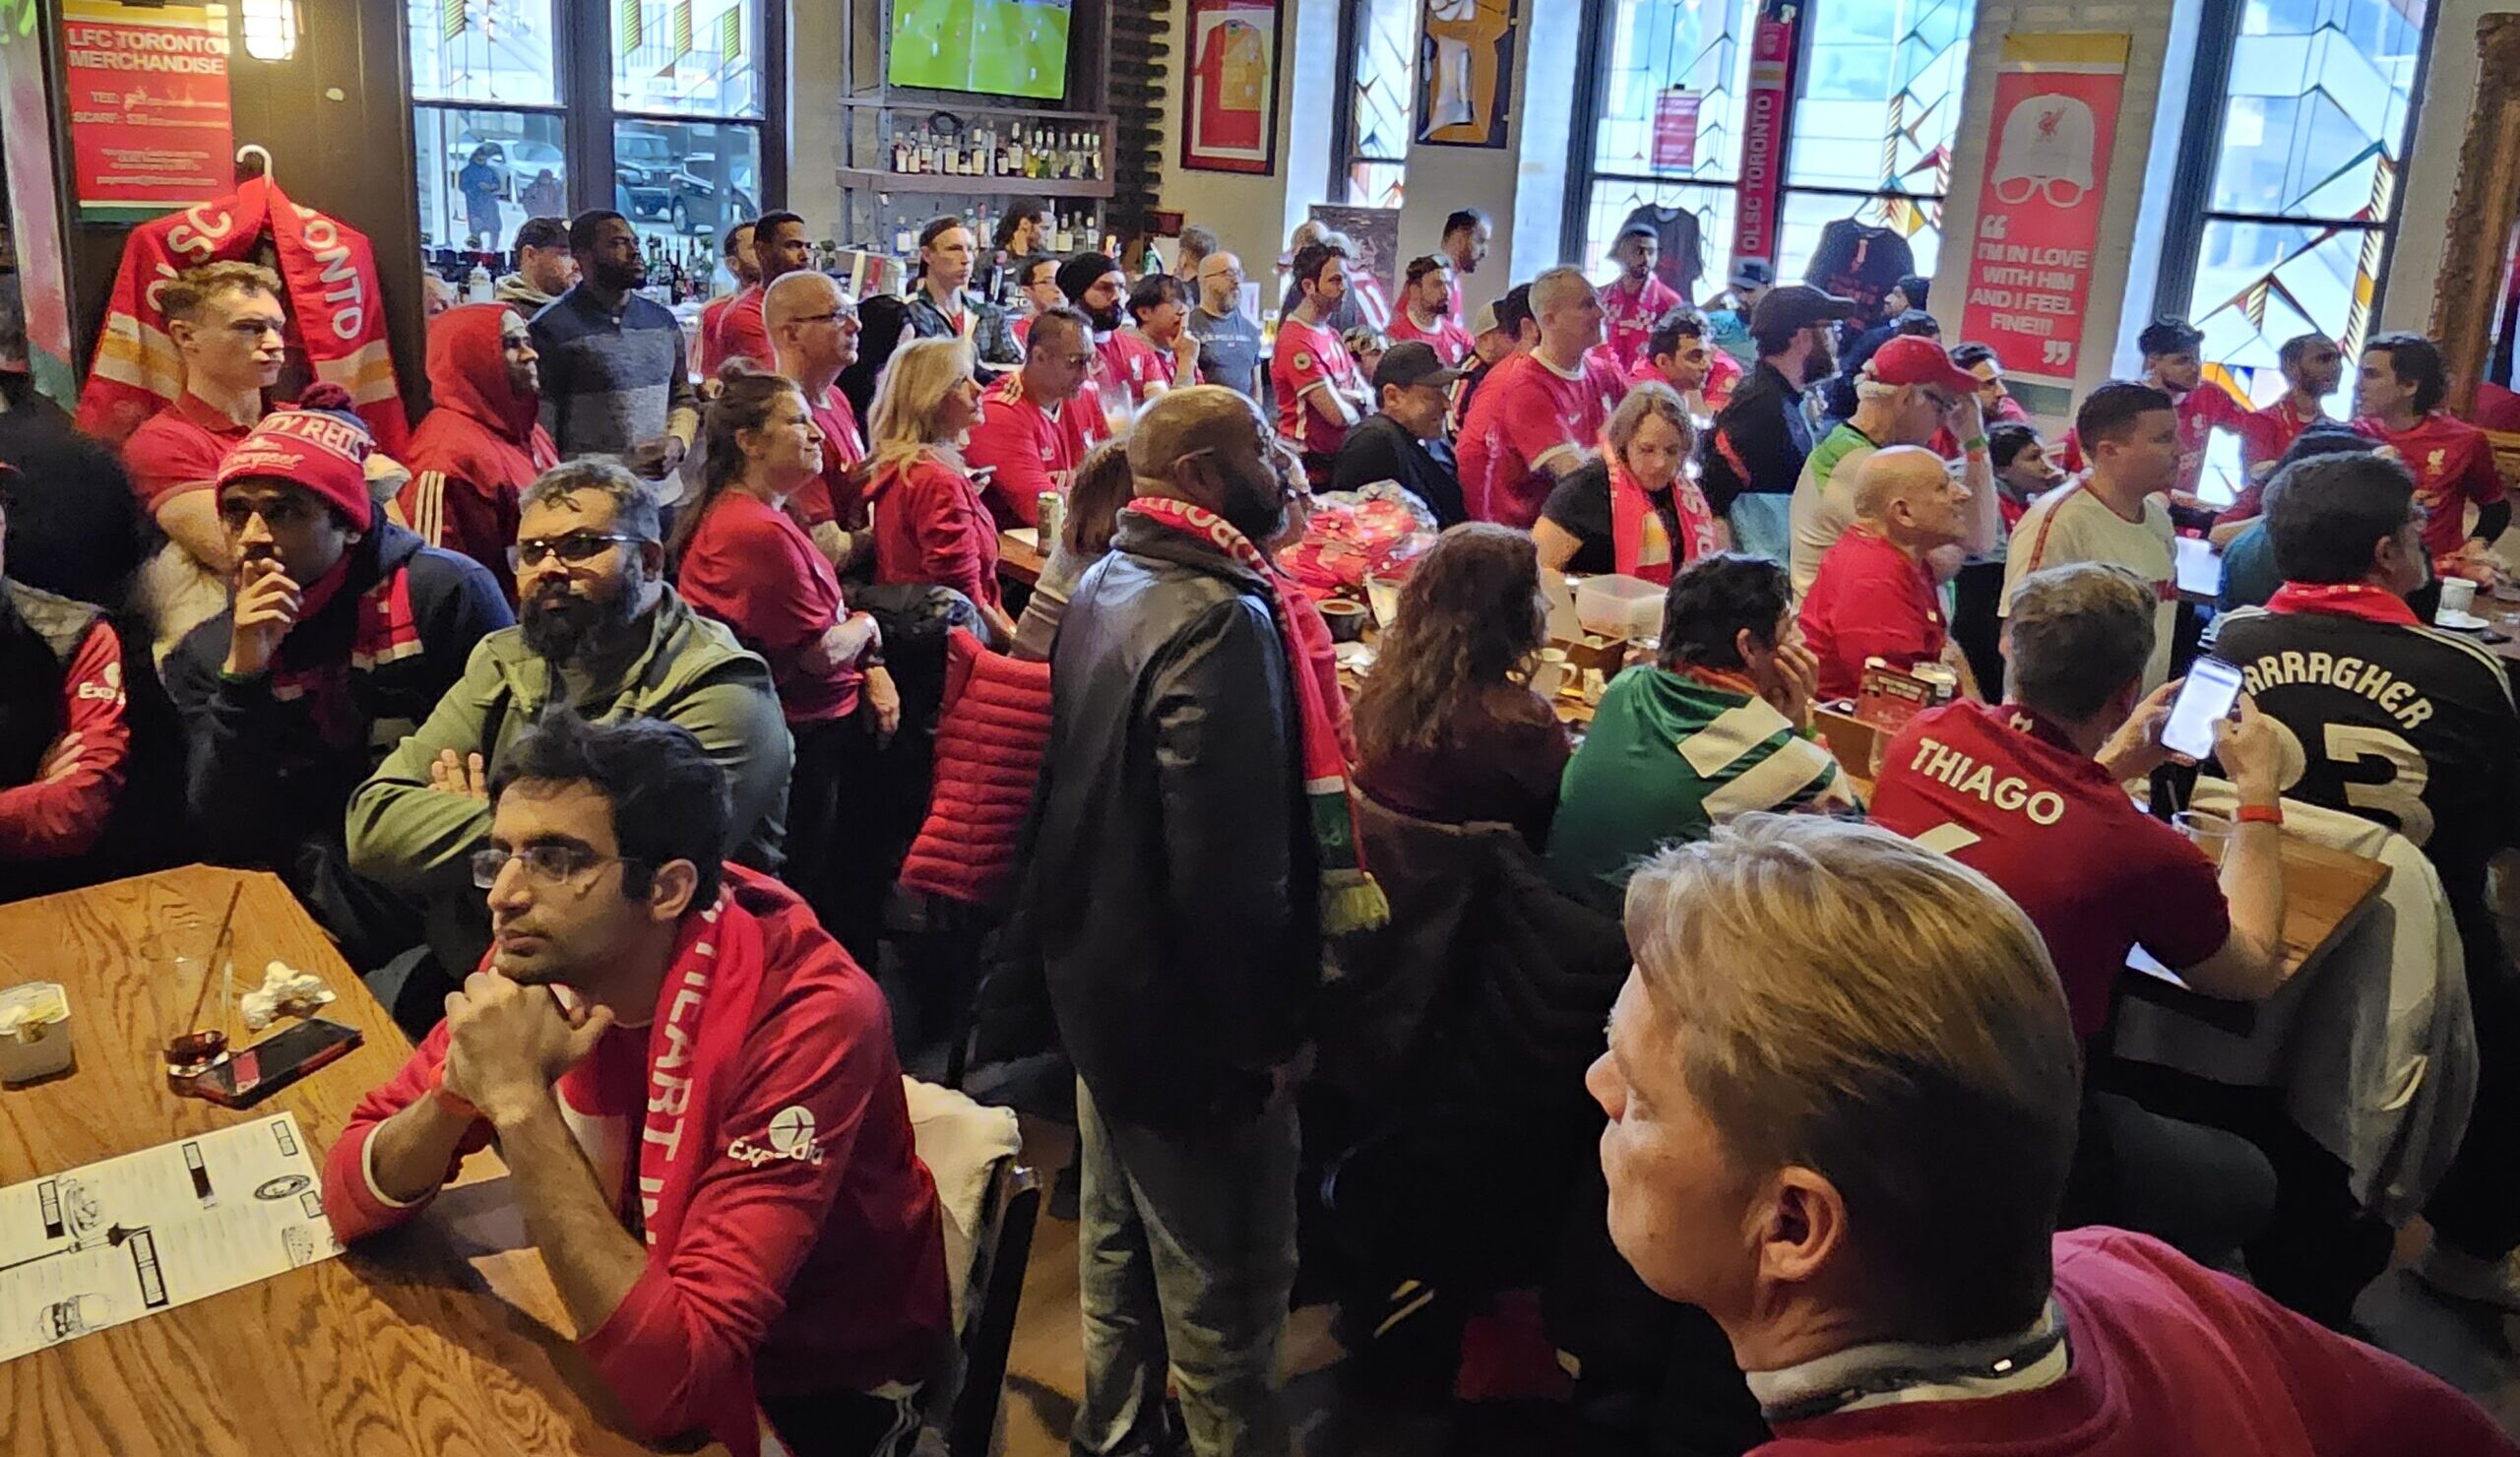 LFC Fans gathered to watch Liverpool FC at Toronto Pub